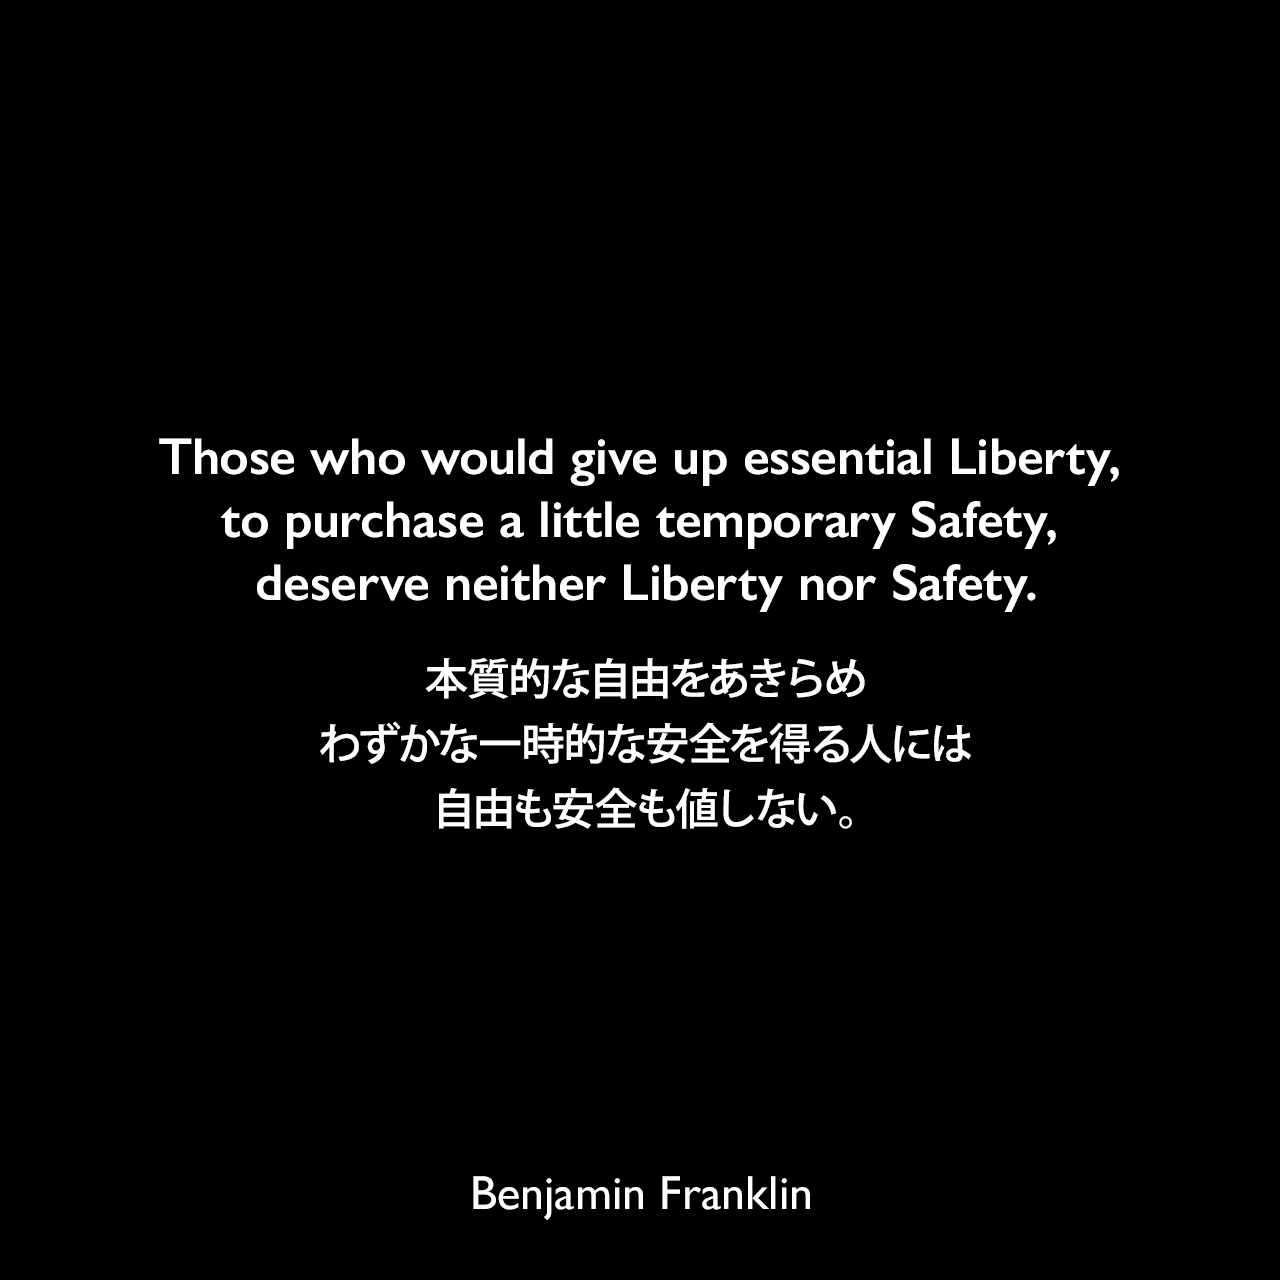 Those who would give up essential Liberty, to purchase a little temporary Safety, deserve neither Liberty nor Safety.本質的な自由をあきらめ、わずかな一時的な安全を得る人には、自由も安全も値しない。- フランクリンによるペンシルベニア州議会の「知事への返答（1755年）」よりBenjamin Franklin